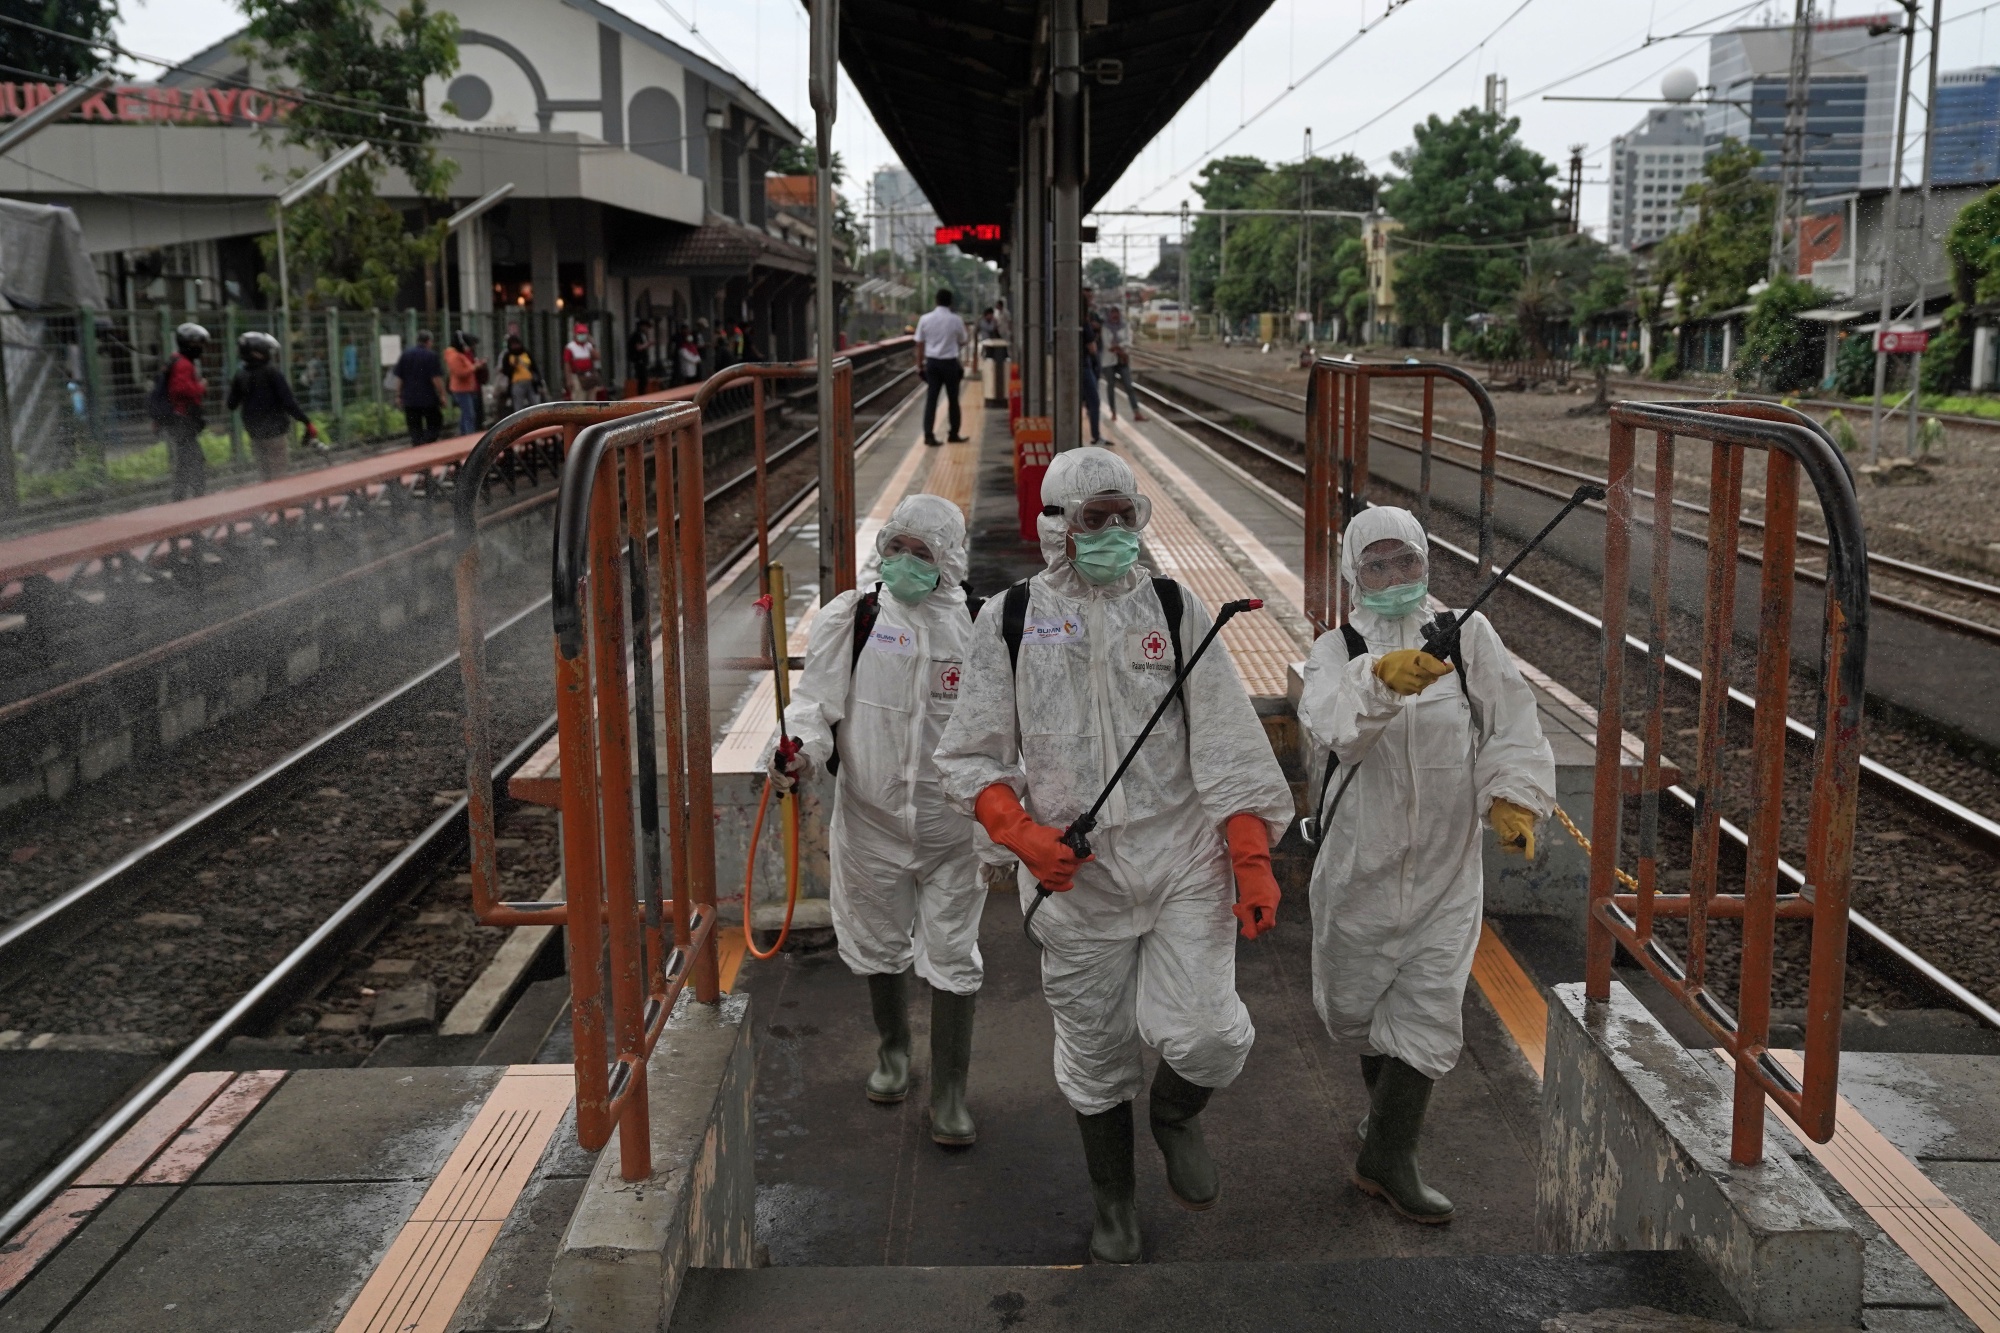 Members of the Indonesian Red Cross Society (IFRC) wearing protective suits and masks spray disinfectants on railings on a platform at the Kemayoran train station in Jakarta.